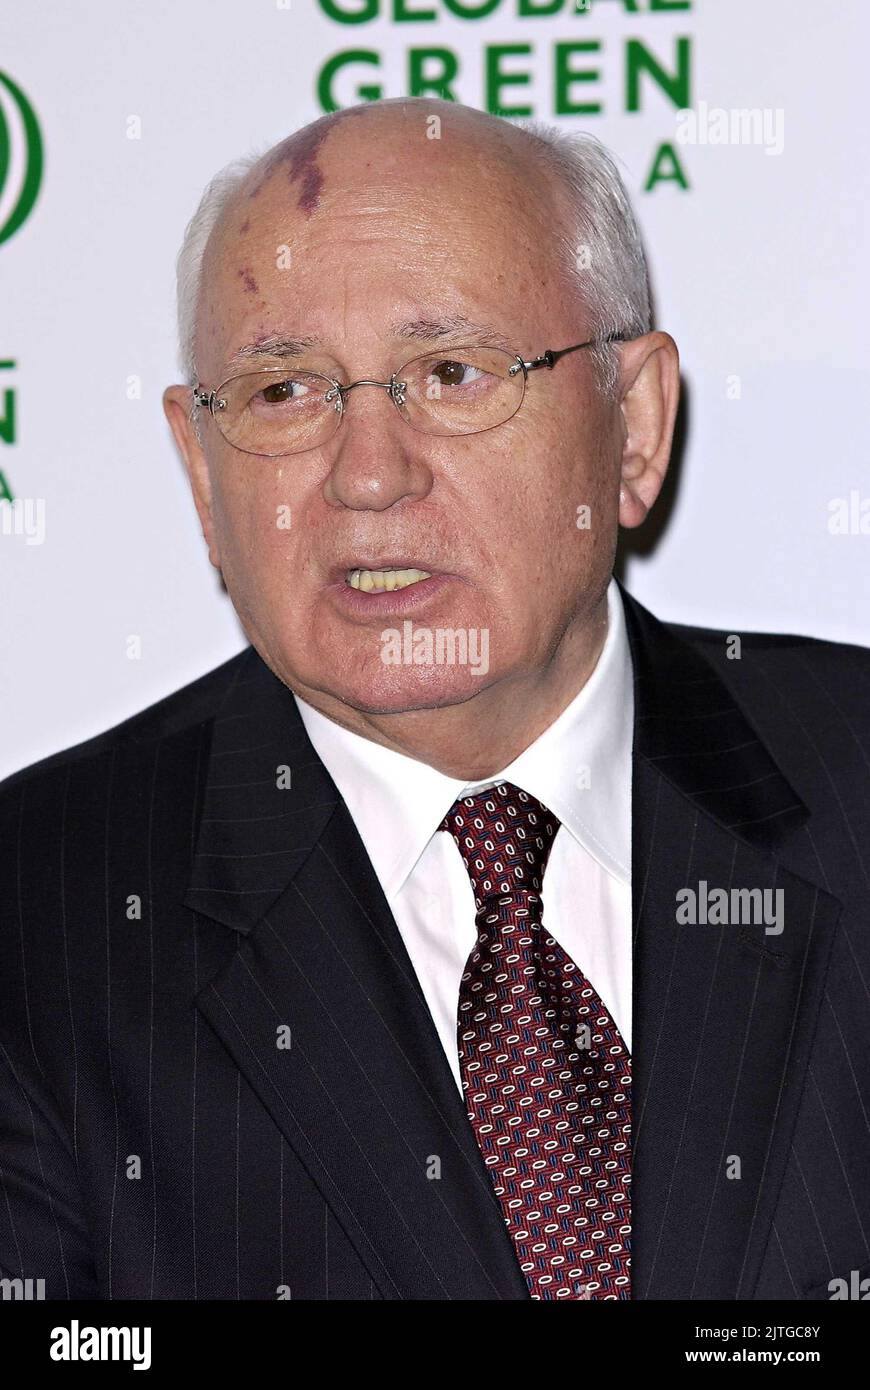 Beverly Hills, California, USA. 15th Apr, 2005. Mikhail Gorbachev. Mikhail Gorbachev and Global Green Announce Awards for Contribution to the Environment at the Beverly Hills Hotel. Photo Credit: Giulio Marcocchi/Sipa Press/0504181904 Credit: Sipa USA/Alamy Live News Stock Photo